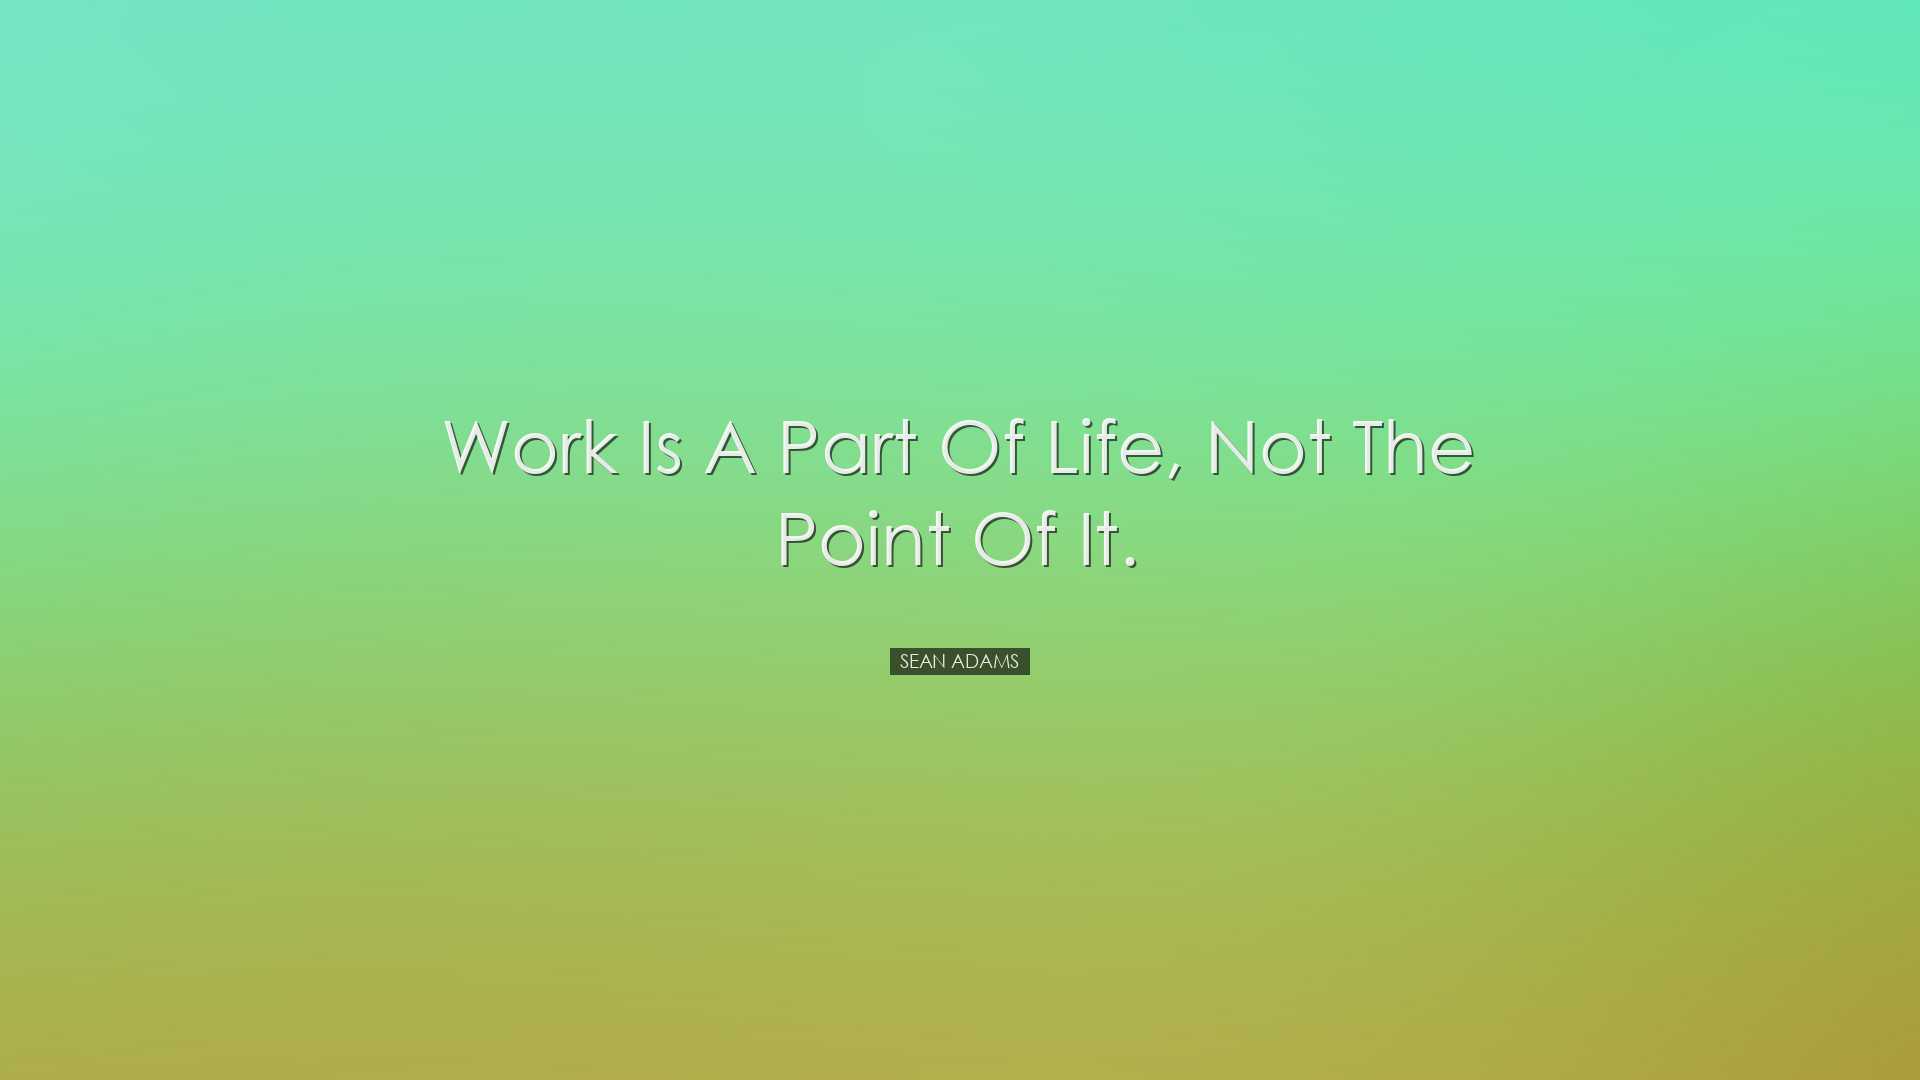 Work is a part of life, not the point of it. - Sean Adams